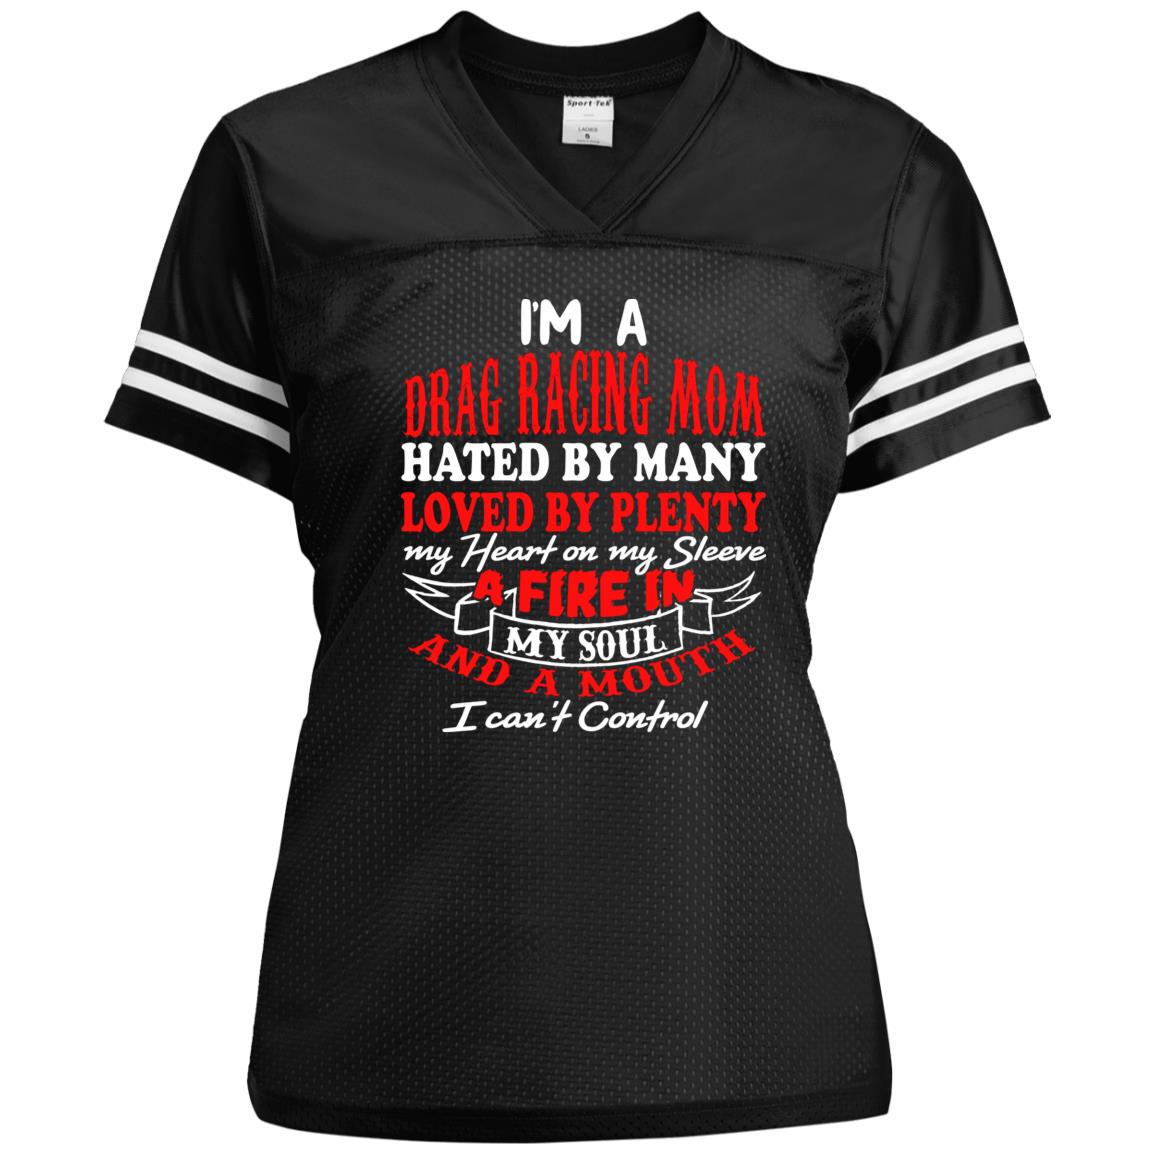 I'm A Drag Racing Mom Hated By Many Loved By Plenty Ladies' Replica Jersey